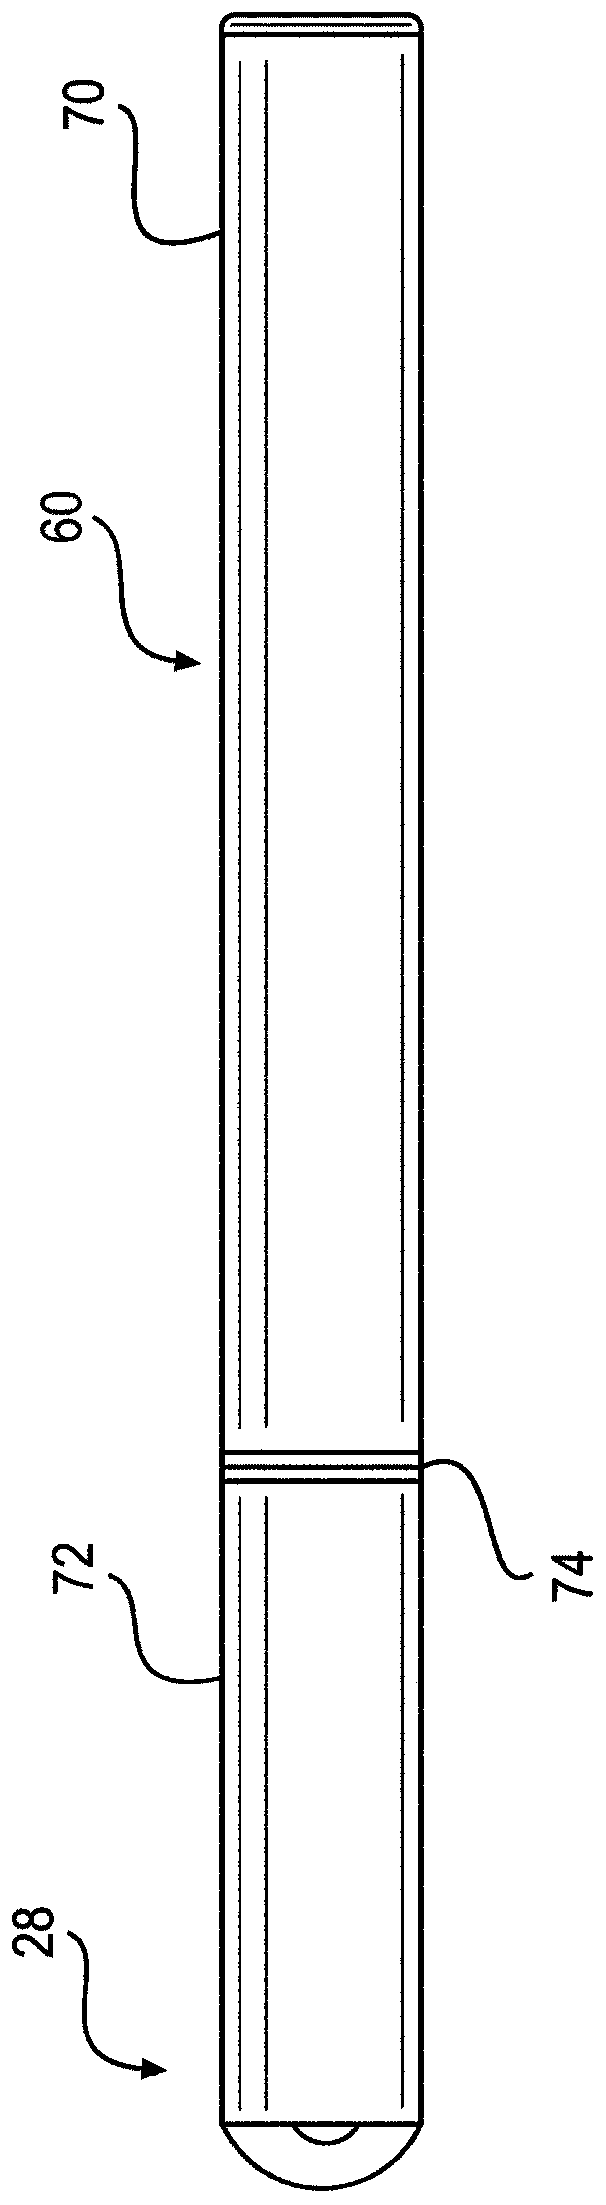 Pre-vapor formulation for formation of organic acids during operation of an e-vaping device